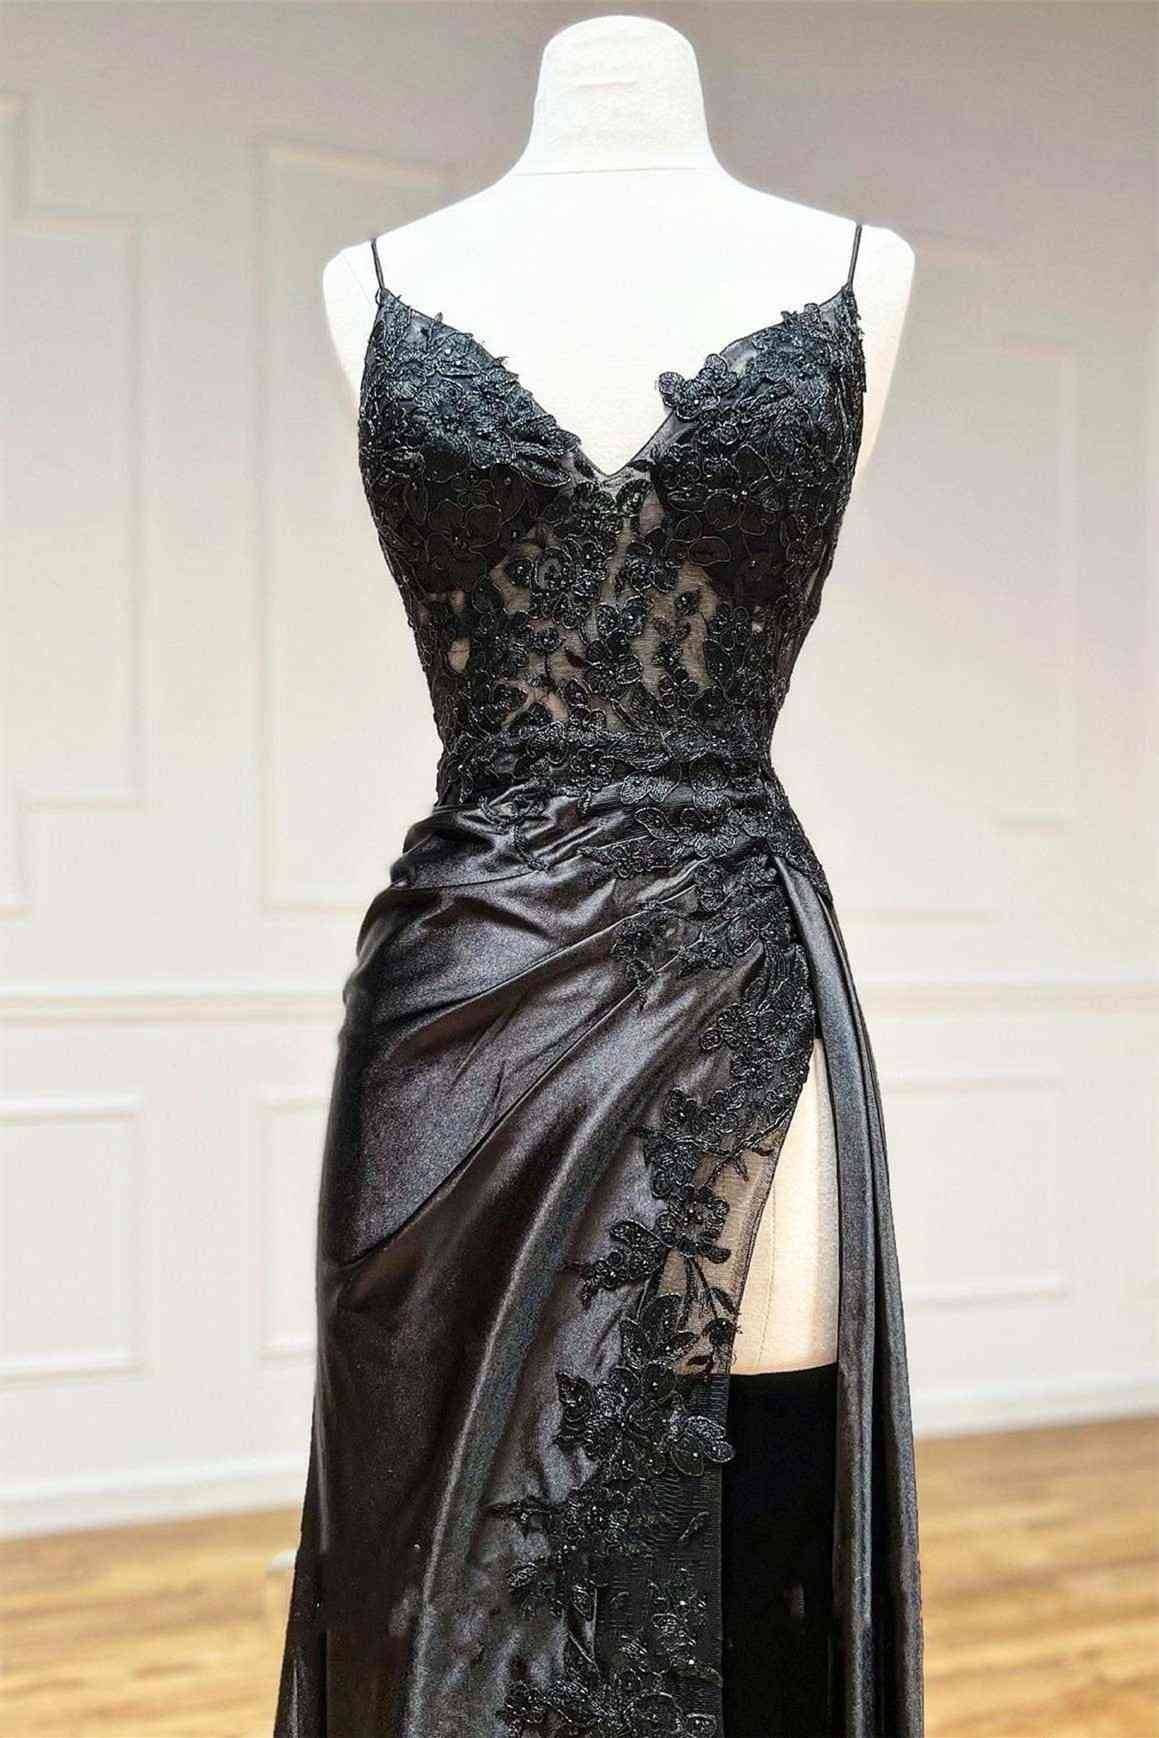 Black Long Appliques Prom Dress Outfits For Women with Spaghetti Straps